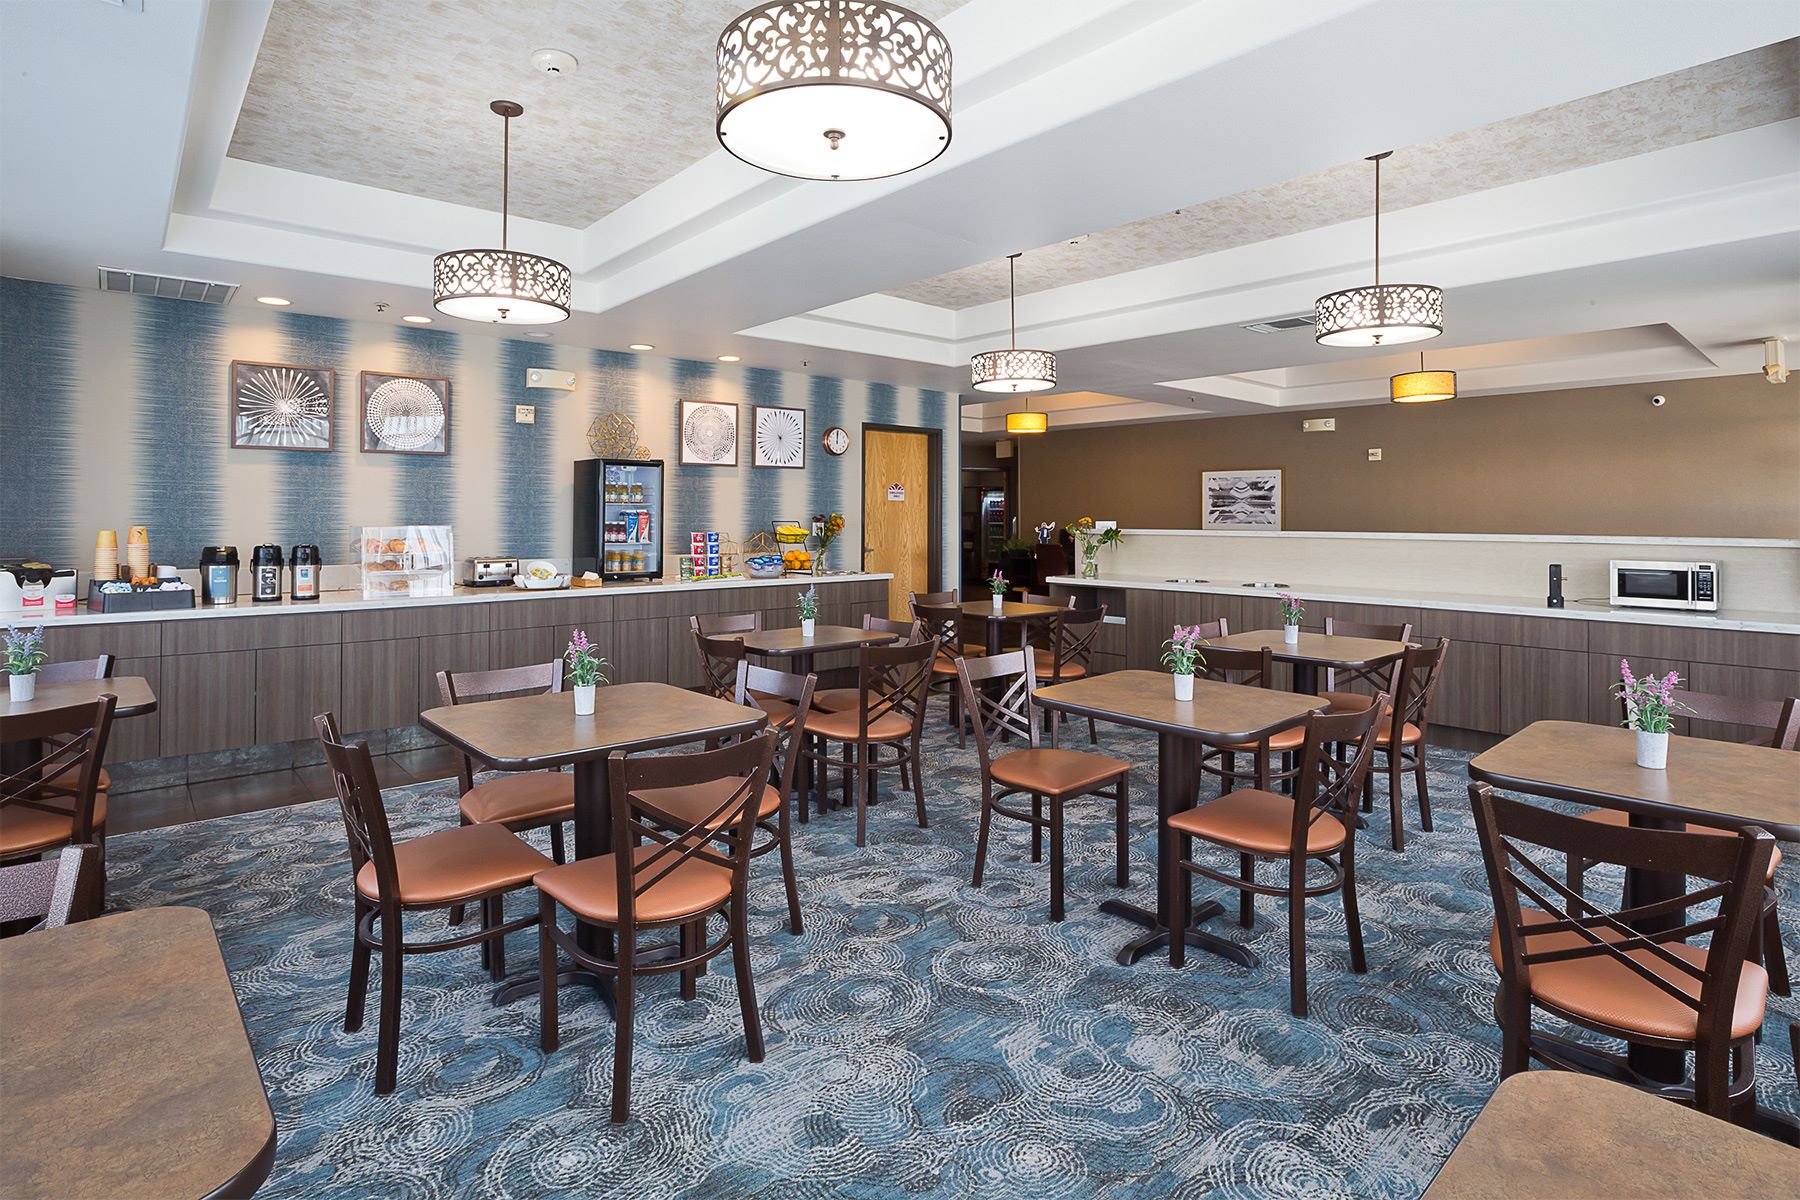 Dining Facilities at Hawthorn Suites By Wyndham-Oakland/Alameda